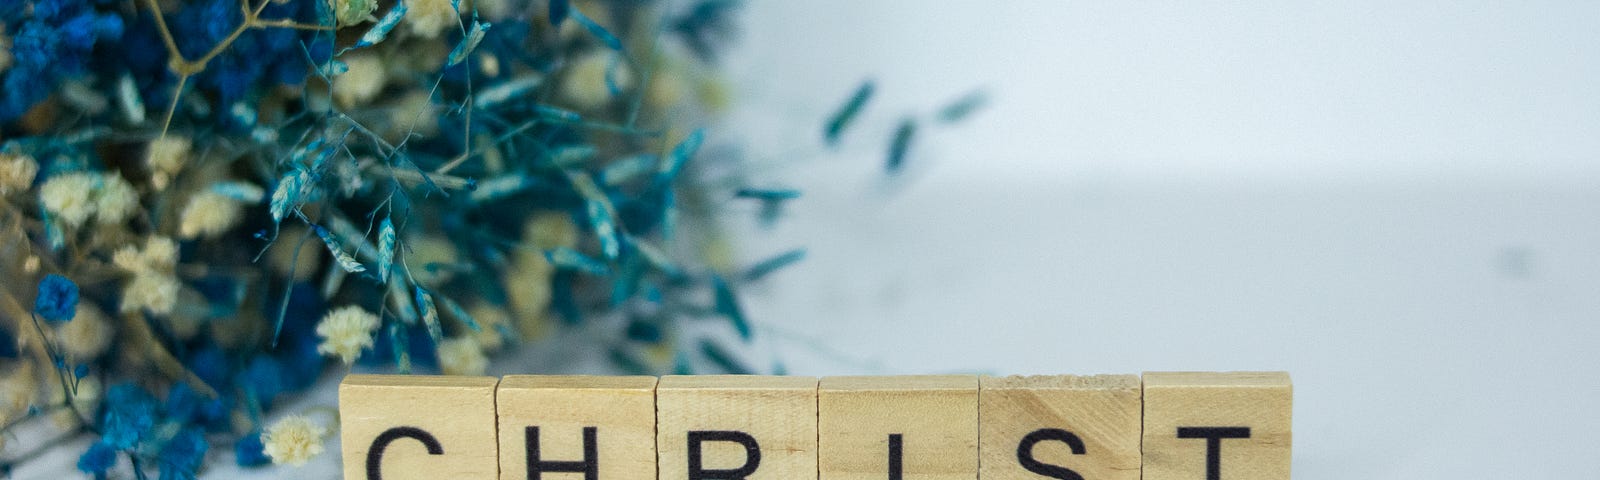 Scrabble tiles that spell CHRIST on white surface with baby’s breath flowers.